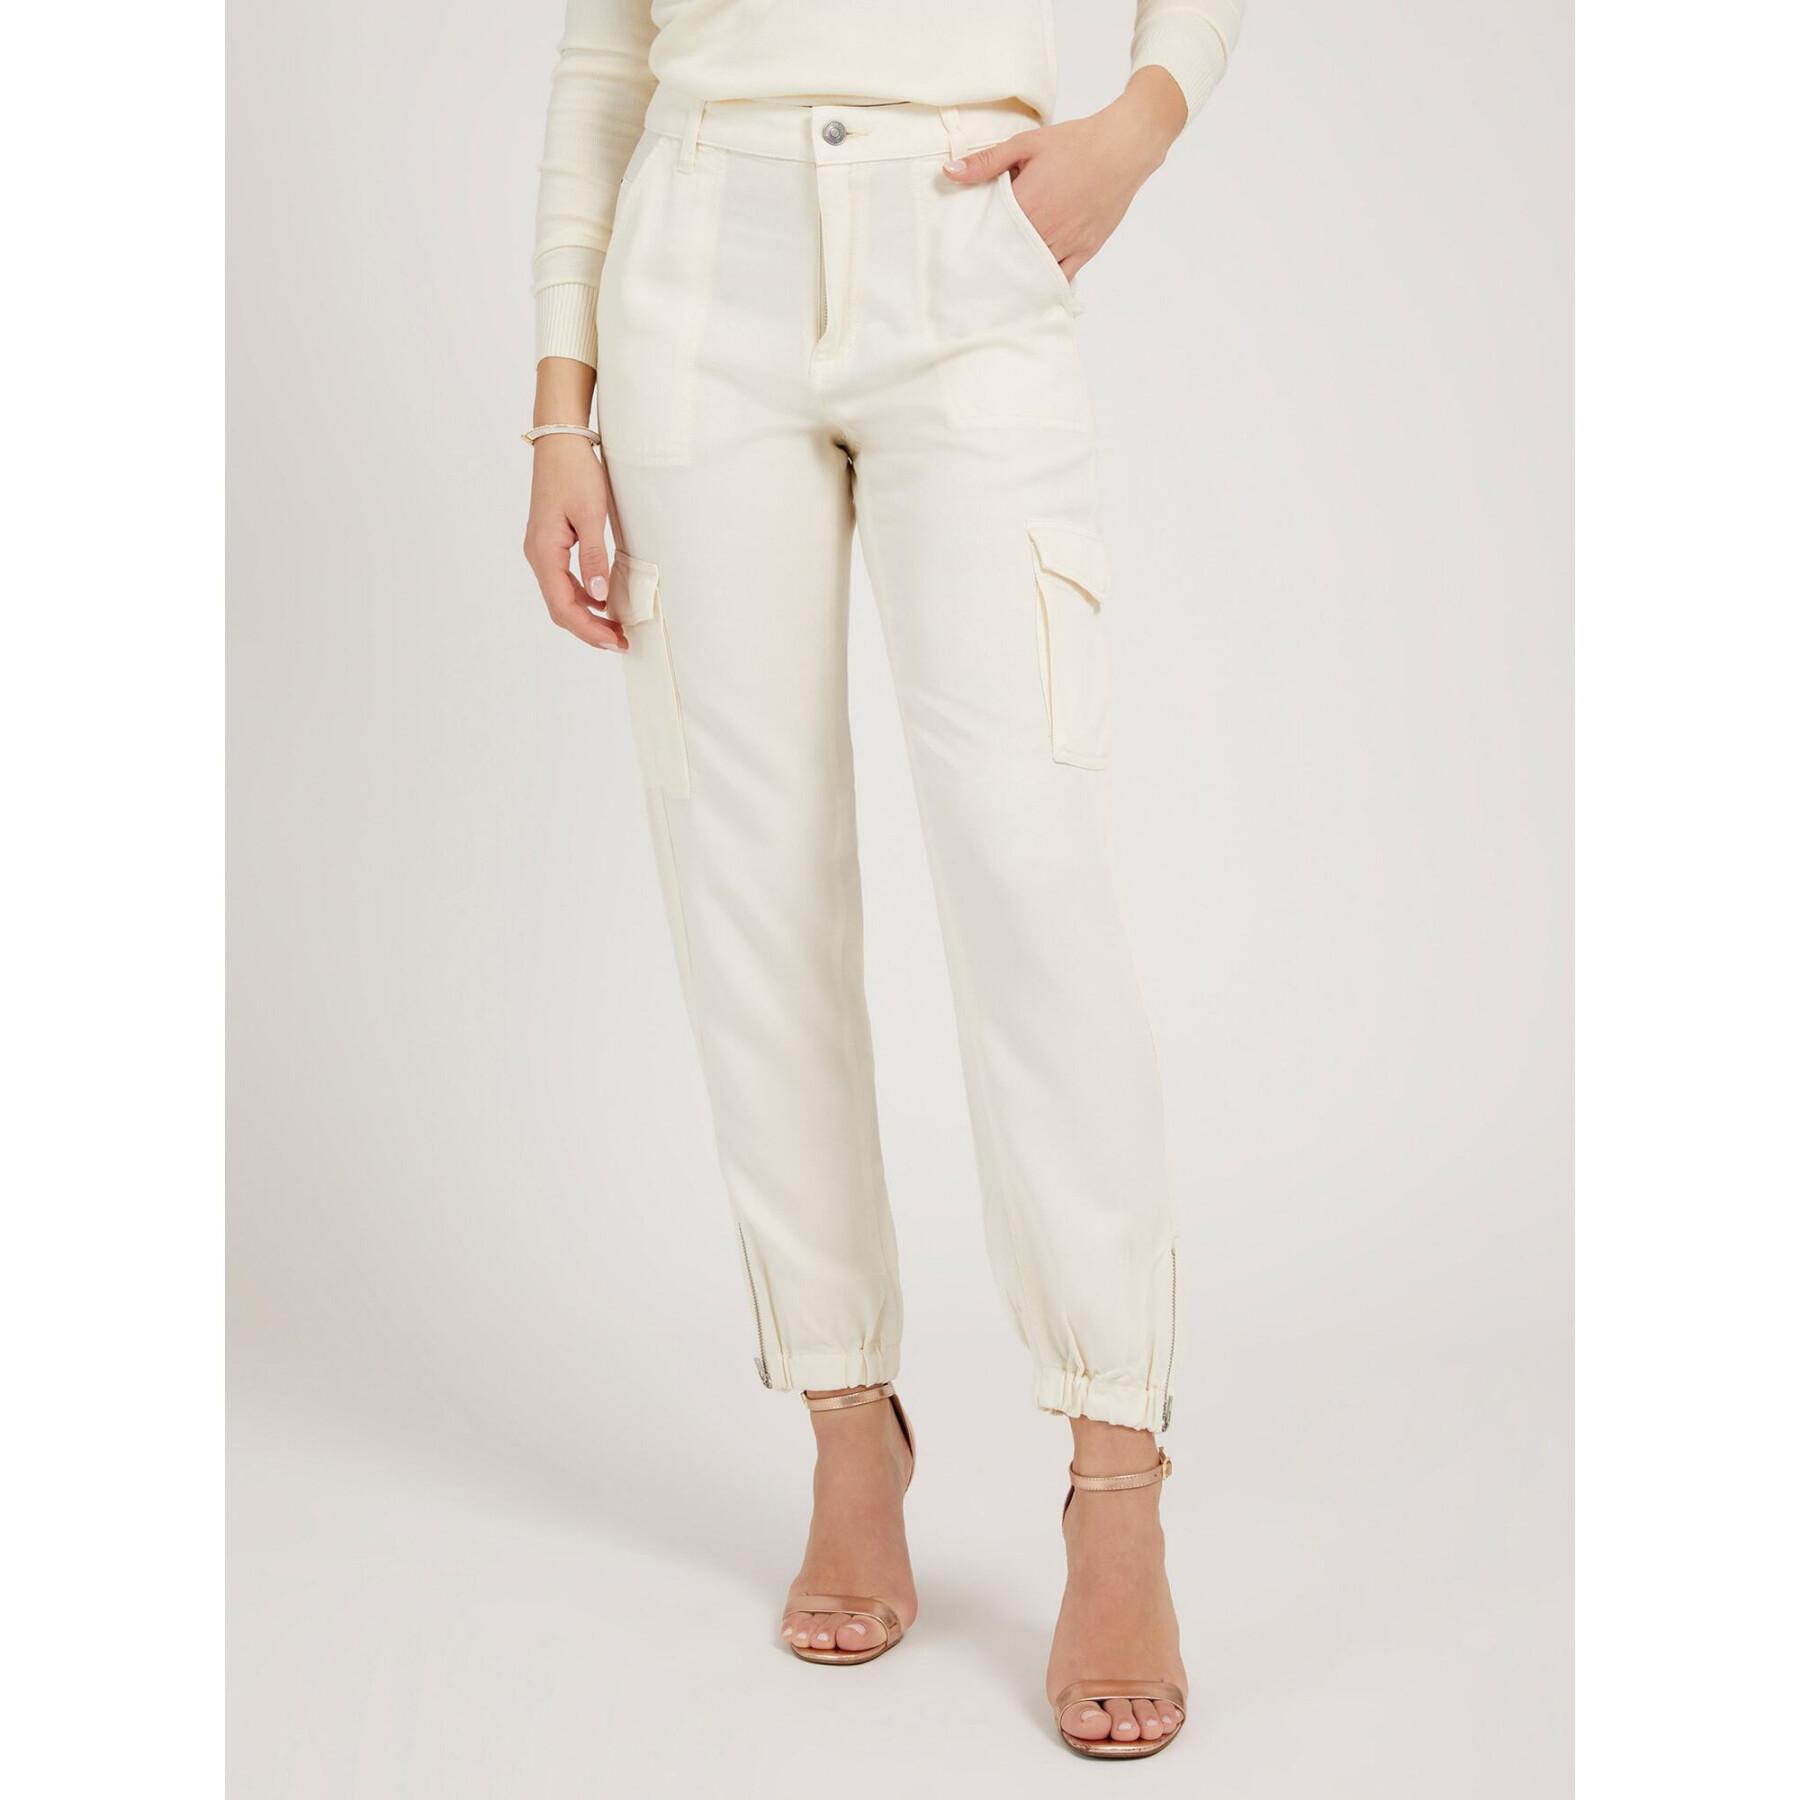 Pantaloni cargo chino femme Guess Es Bowie